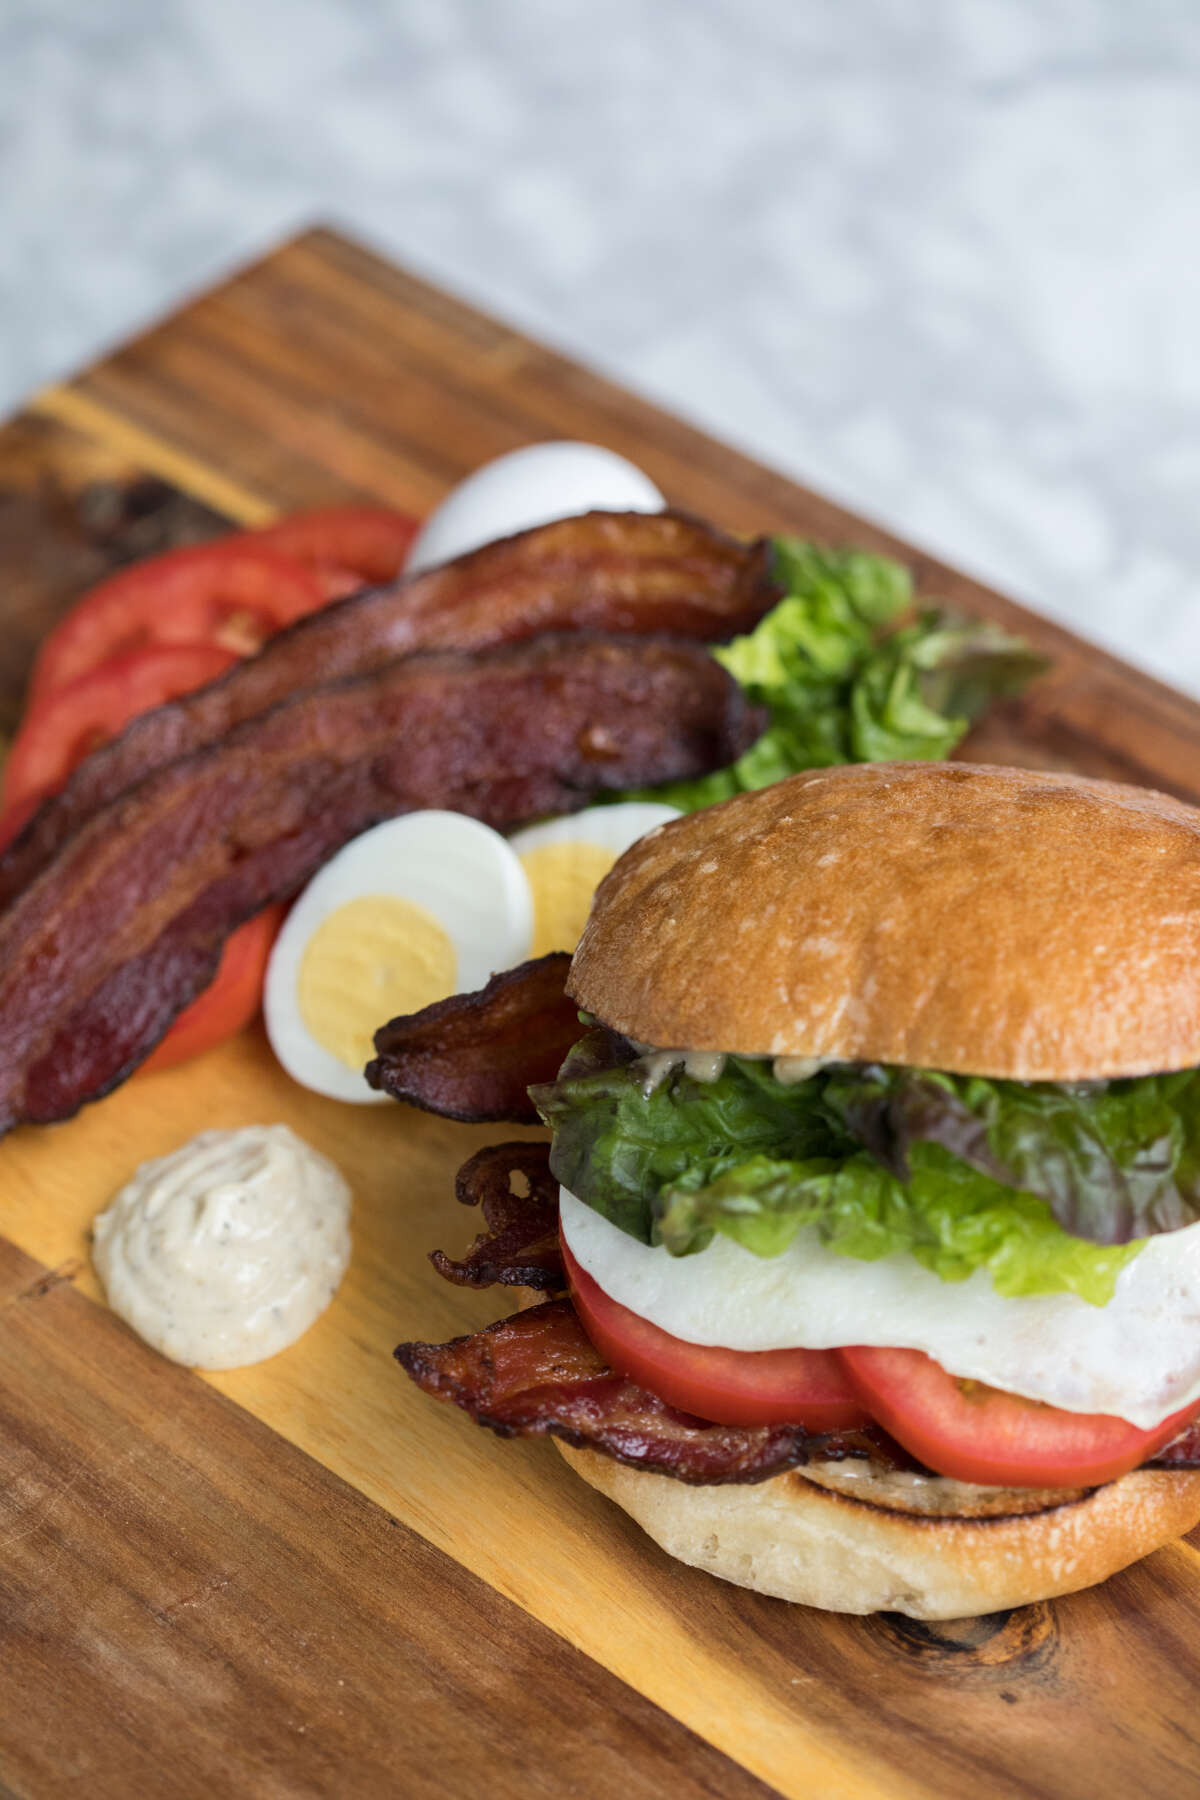 Buckle up for the BELT, Gourmondo's bacon, egg, lettuce, and tomato sandwich, dished out this month at their new cafe on Elliott Bay. Scroll for all the details on the debut, or keep clicking for more 2019 restaurant openings in Seattle.